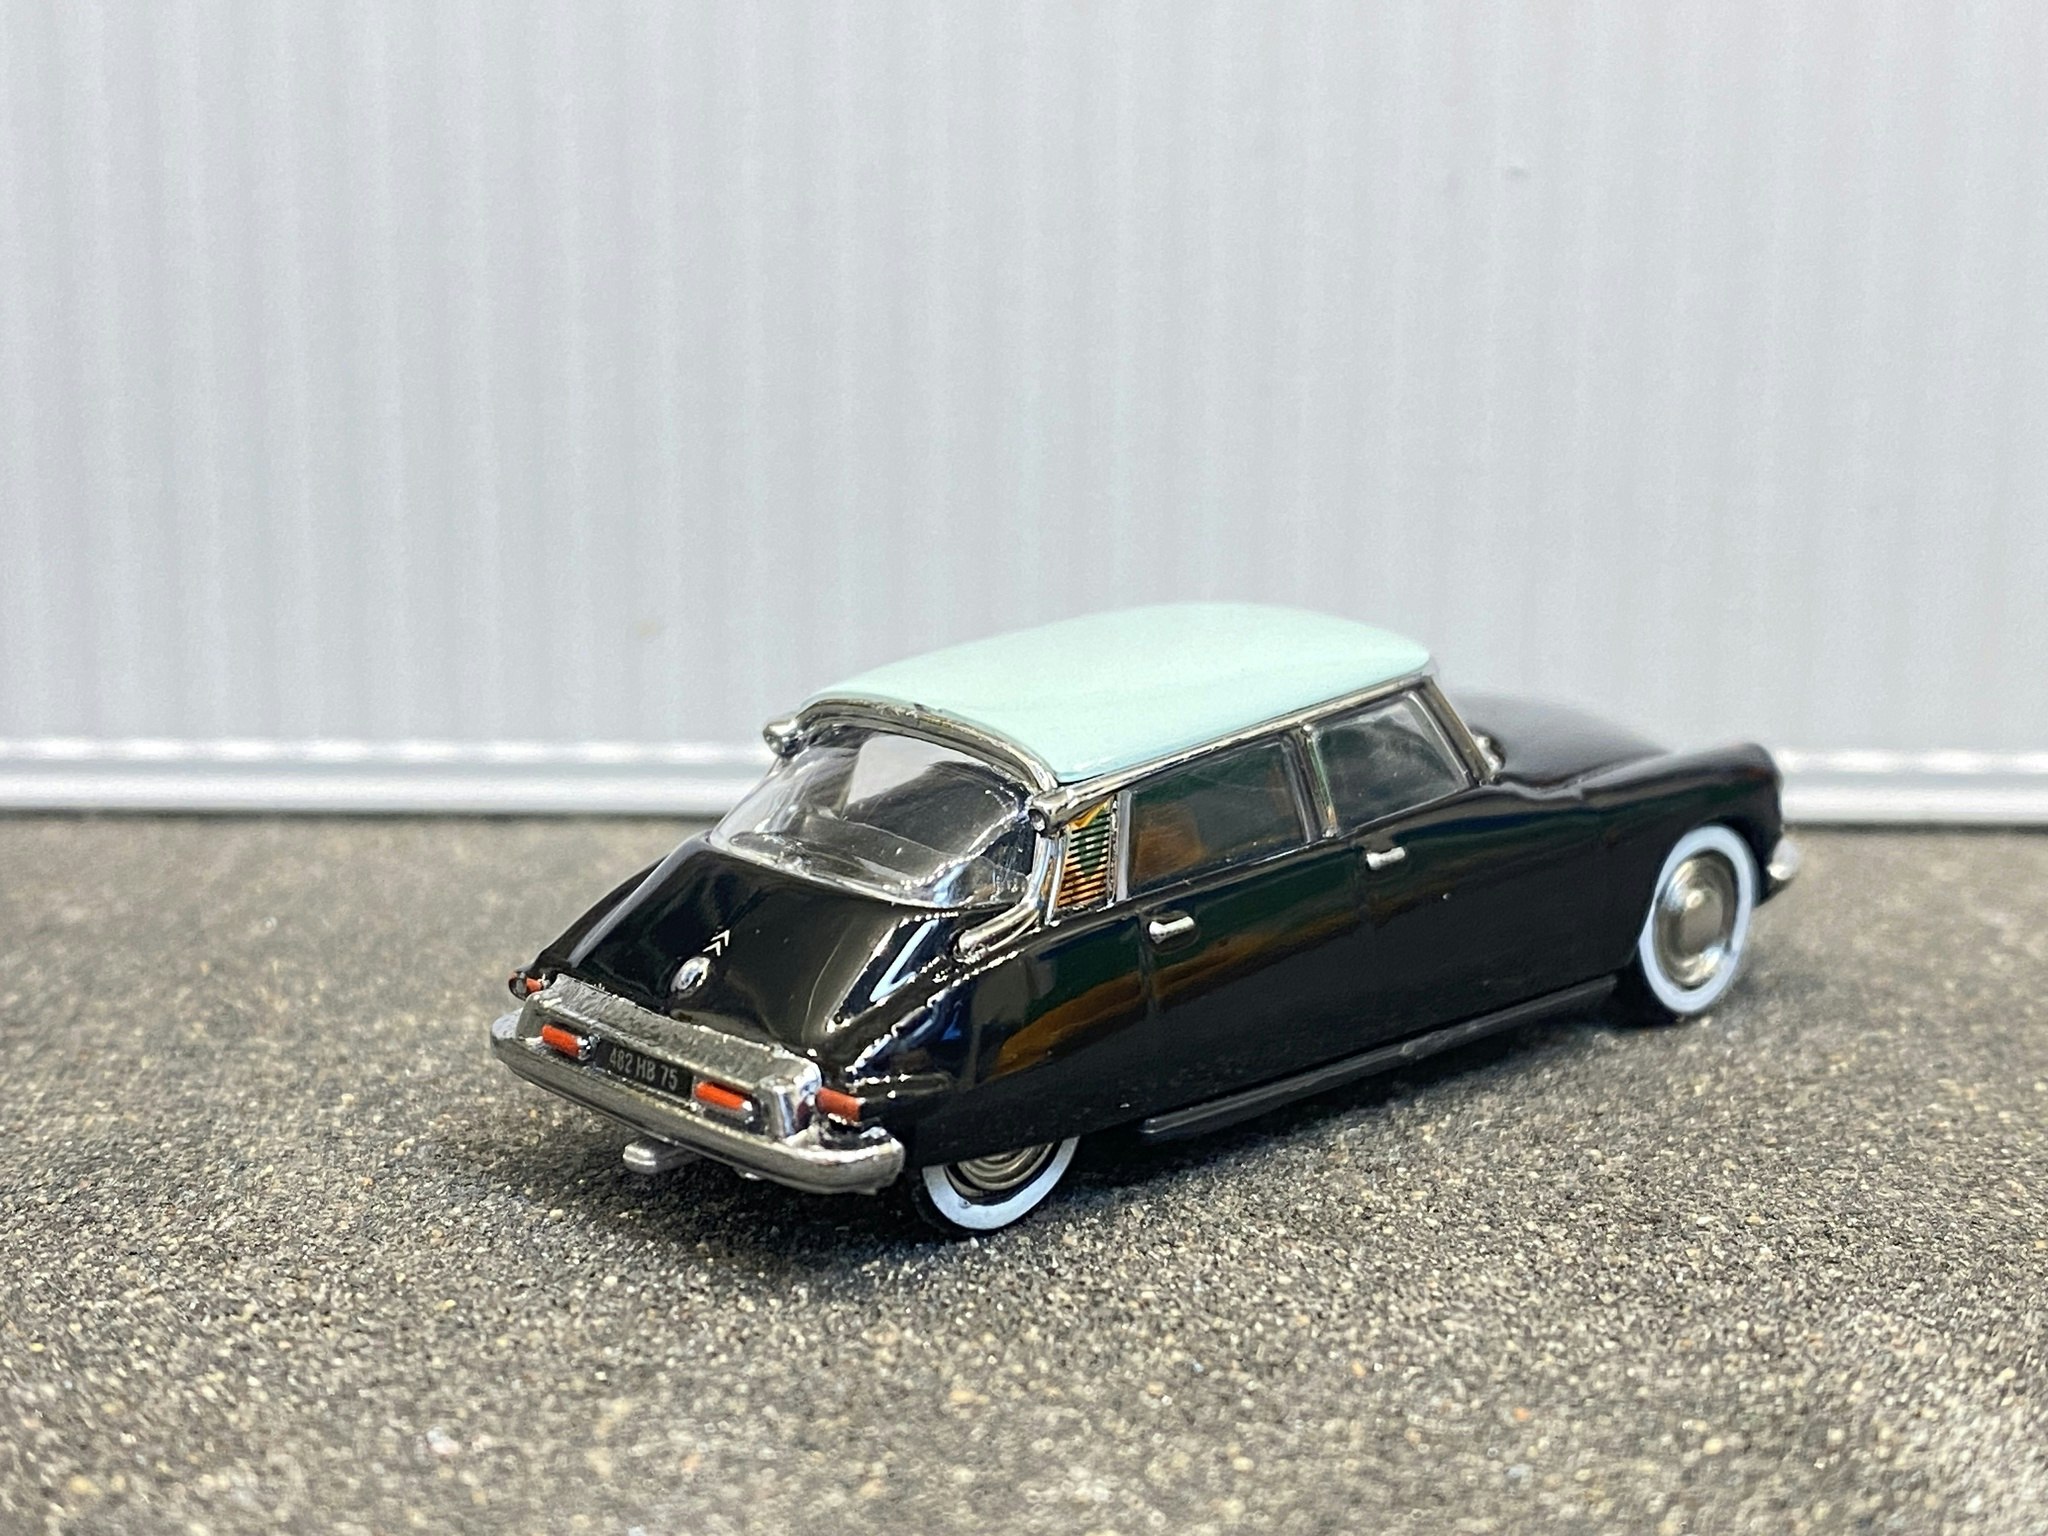 Scale 1/87 H0, Citroen ID 19 1958 Black, w mint green roof from Norev